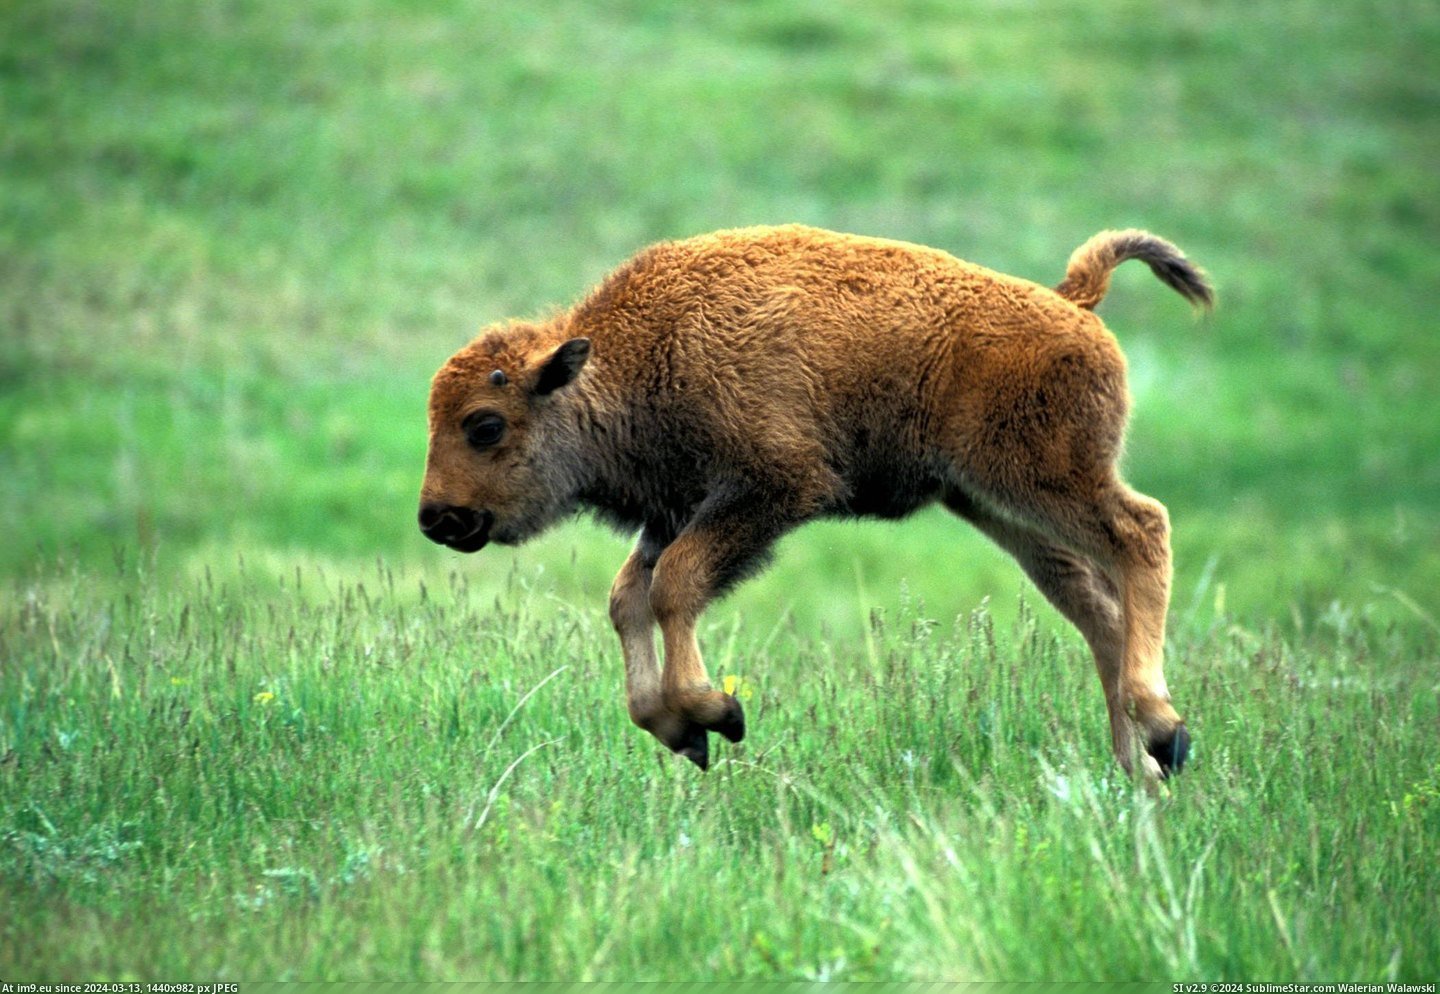 #All #Baby #Compliment #Bison #Frolicking #Page #Front [Pics] To compliment all those front page posts, here's a baby bison frolicking Pic. (Изображение из альбом My r/PICS favs))